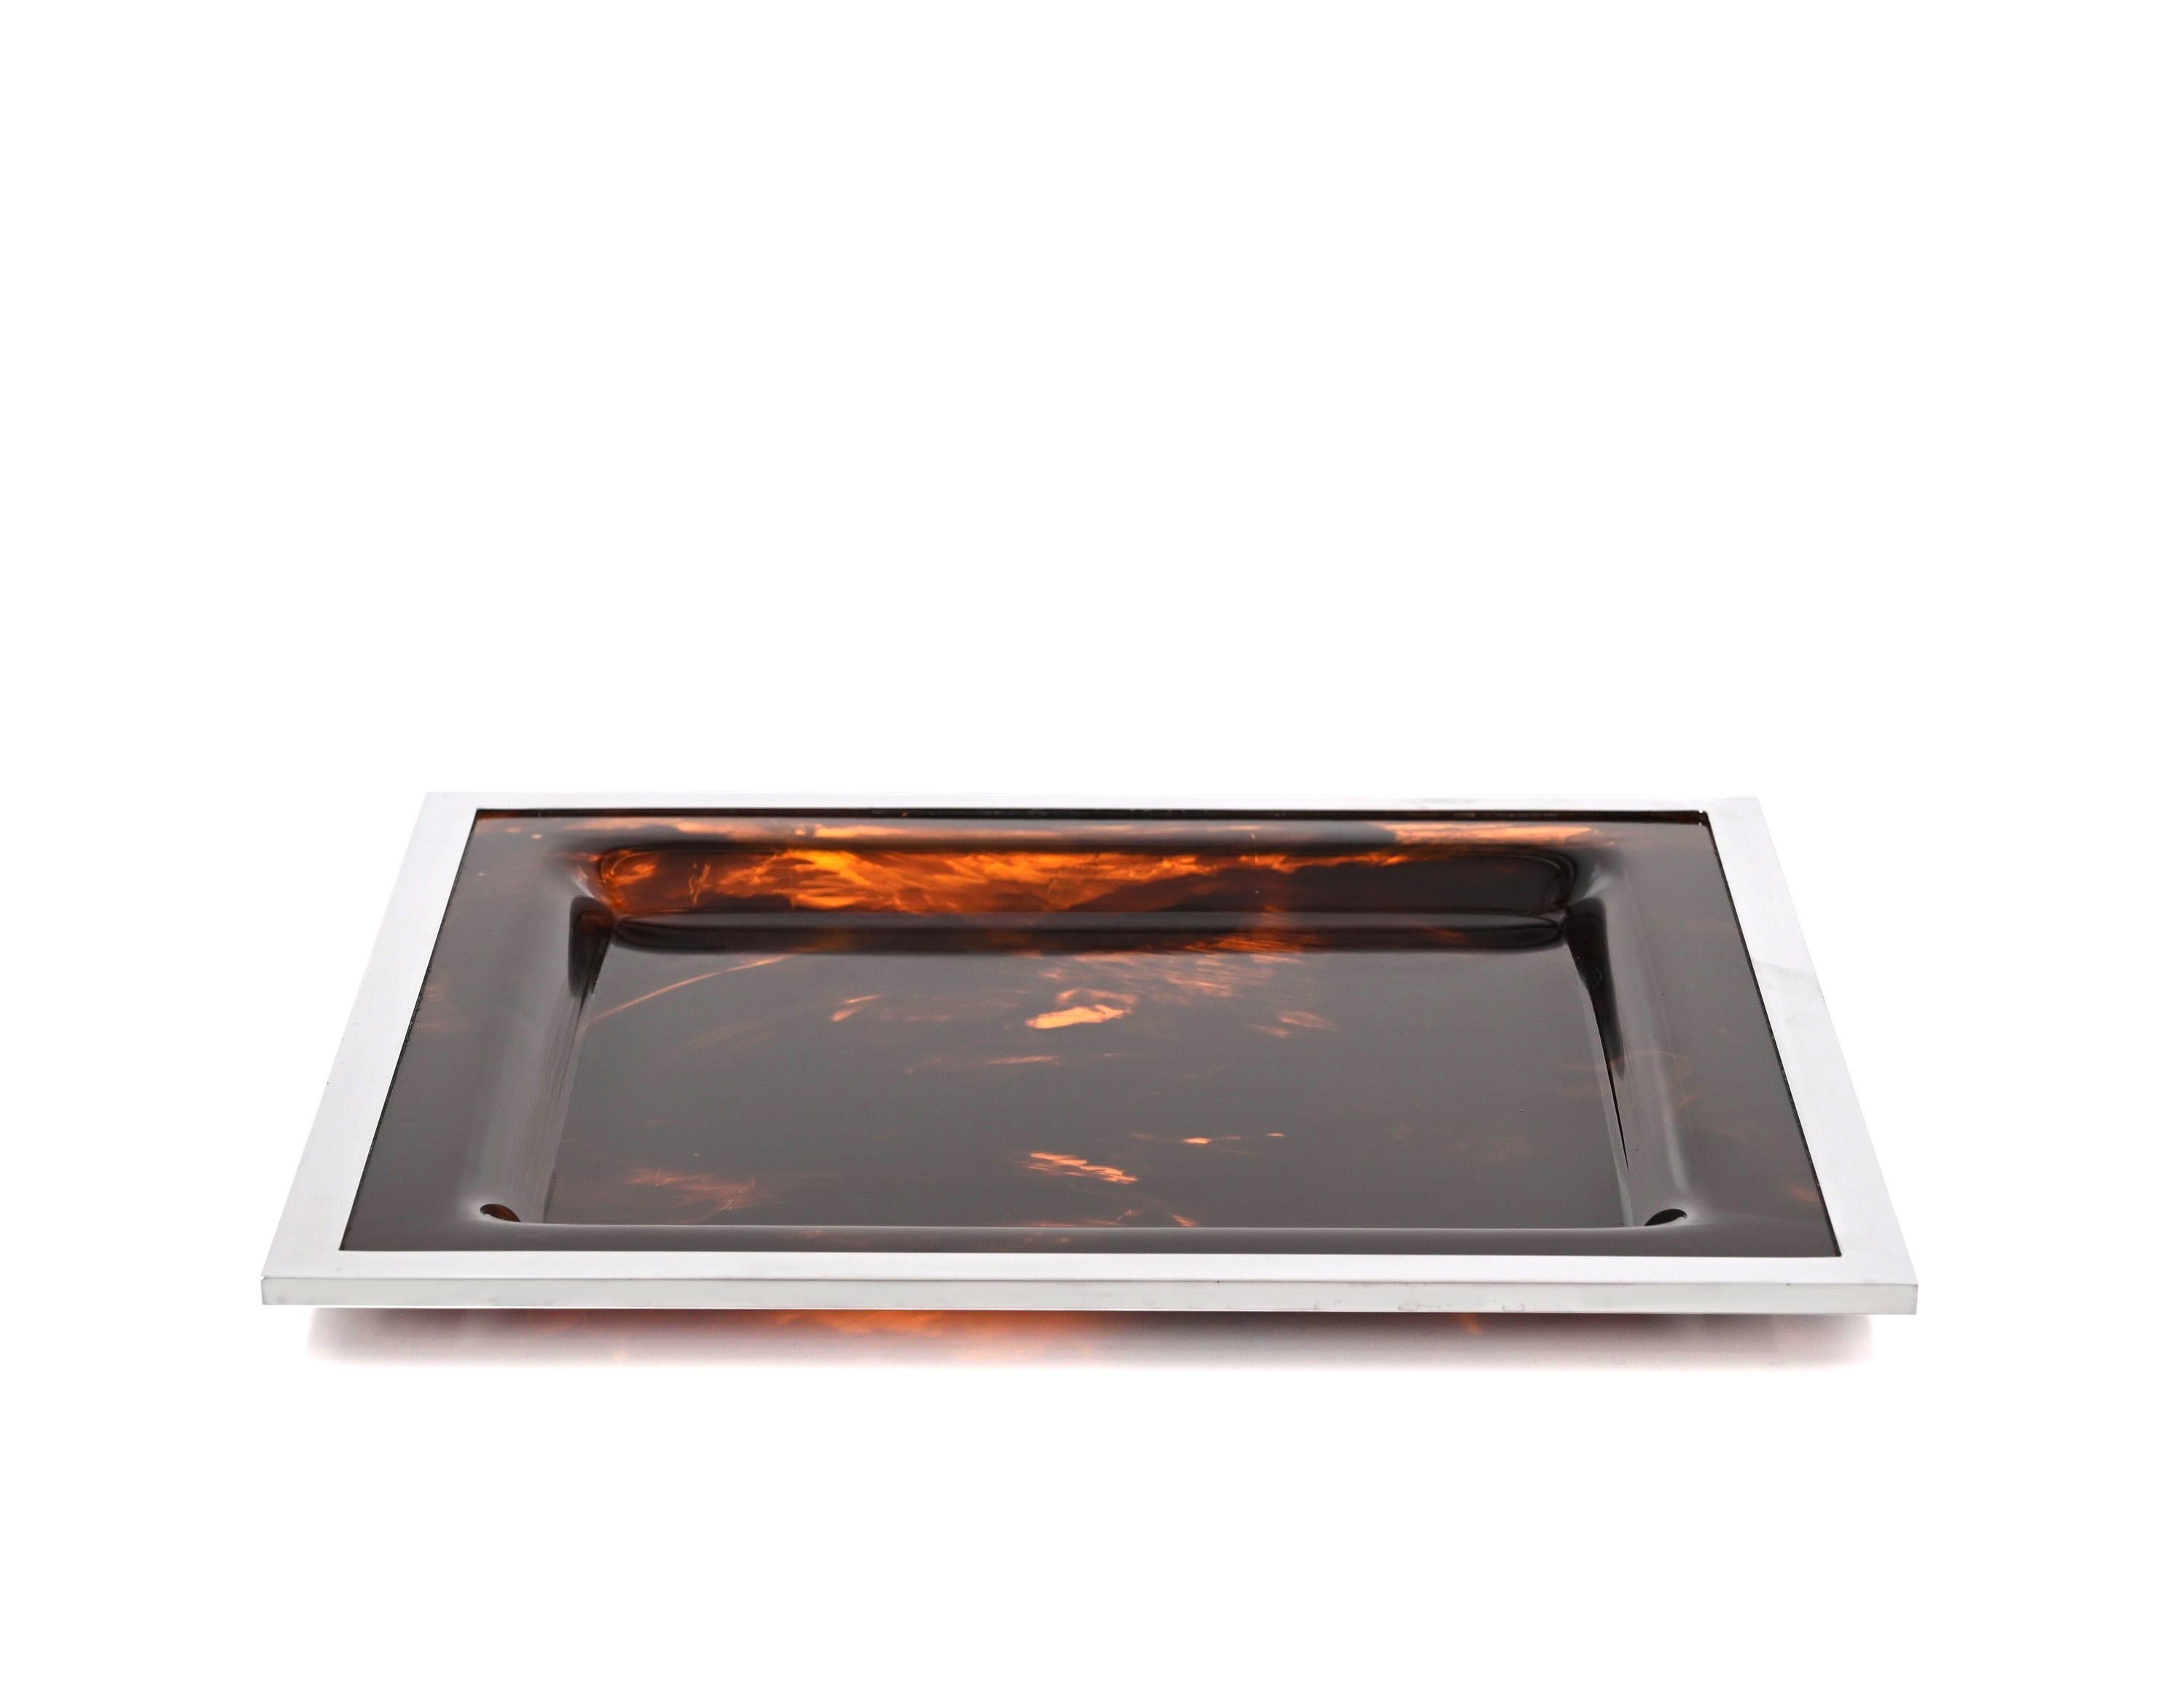 Christian Dior Midcentury Tortoiseshell and Lucite Italian Serving Tray, 1970s For Sale 1